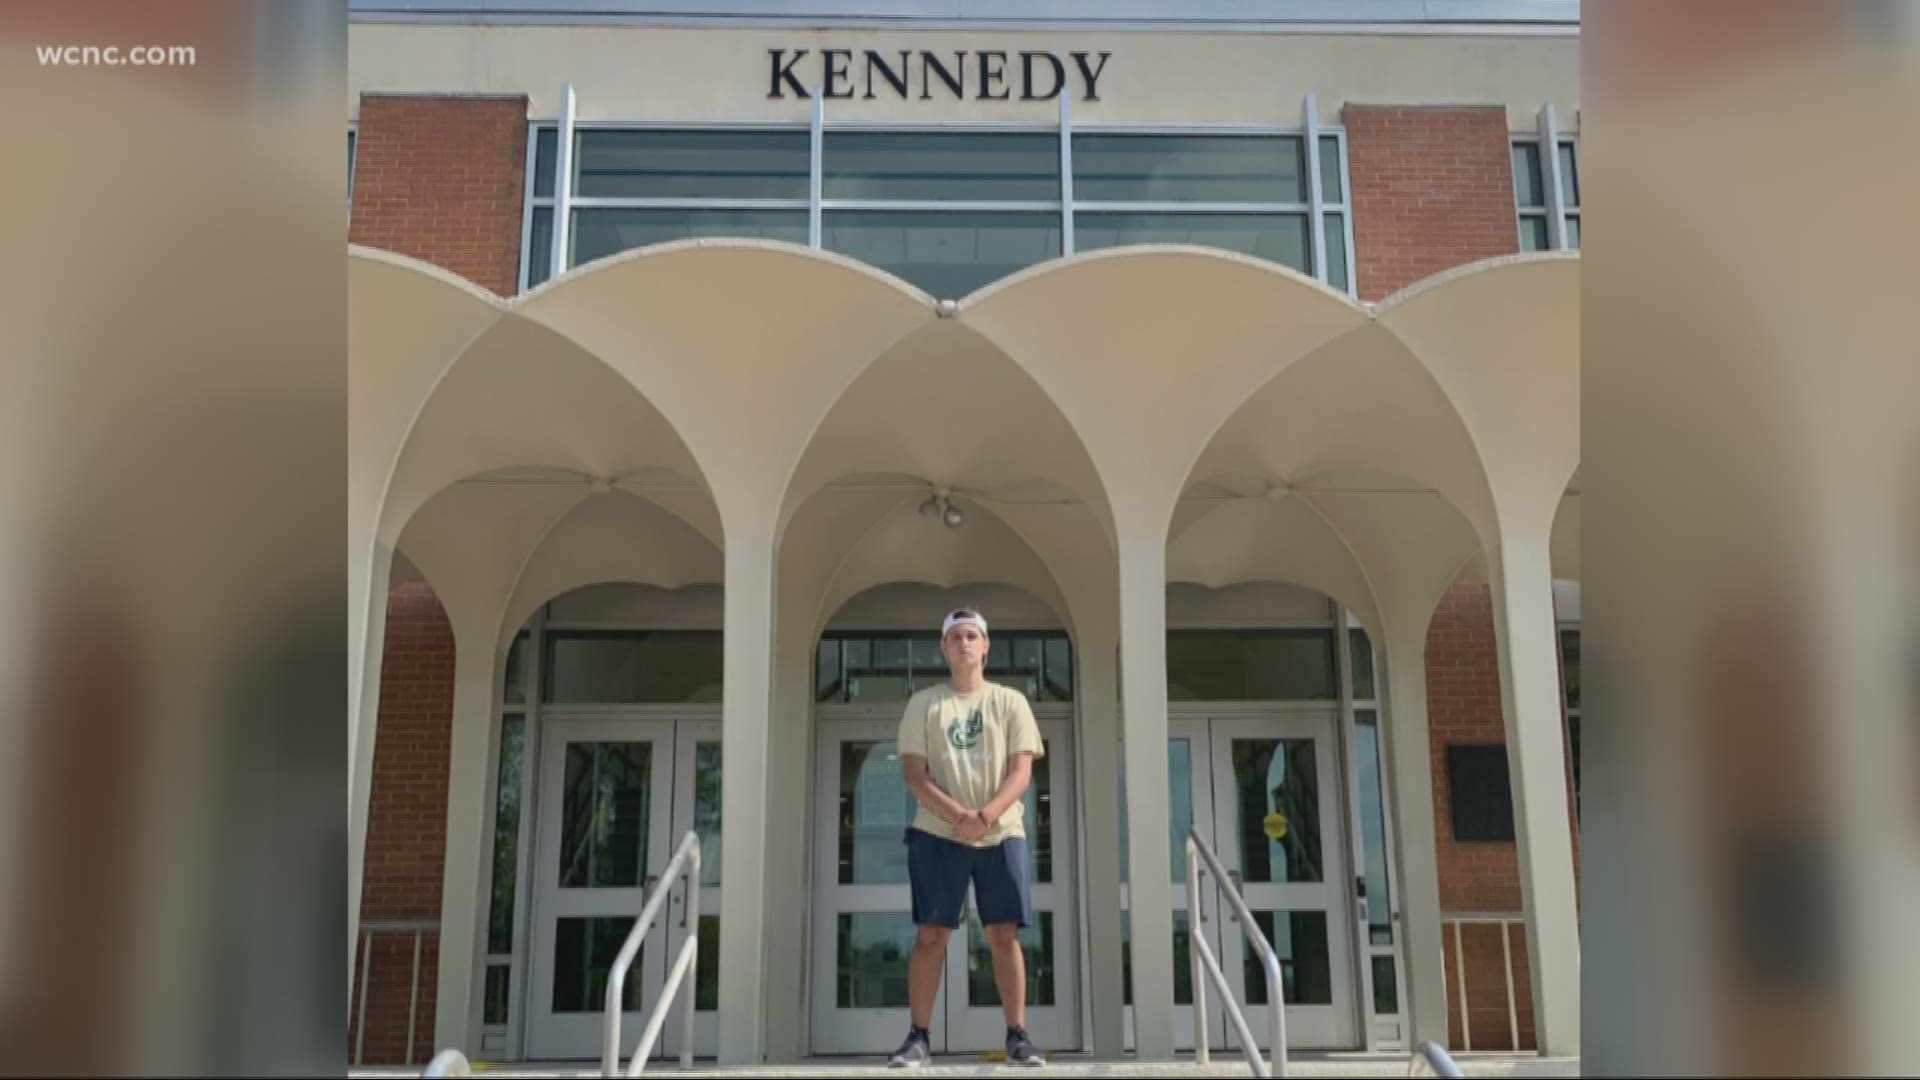 For the first time since he was shot by a gunman on campus, UNC Charlotte student Drew Pescaro visited the building where tragedy struck.